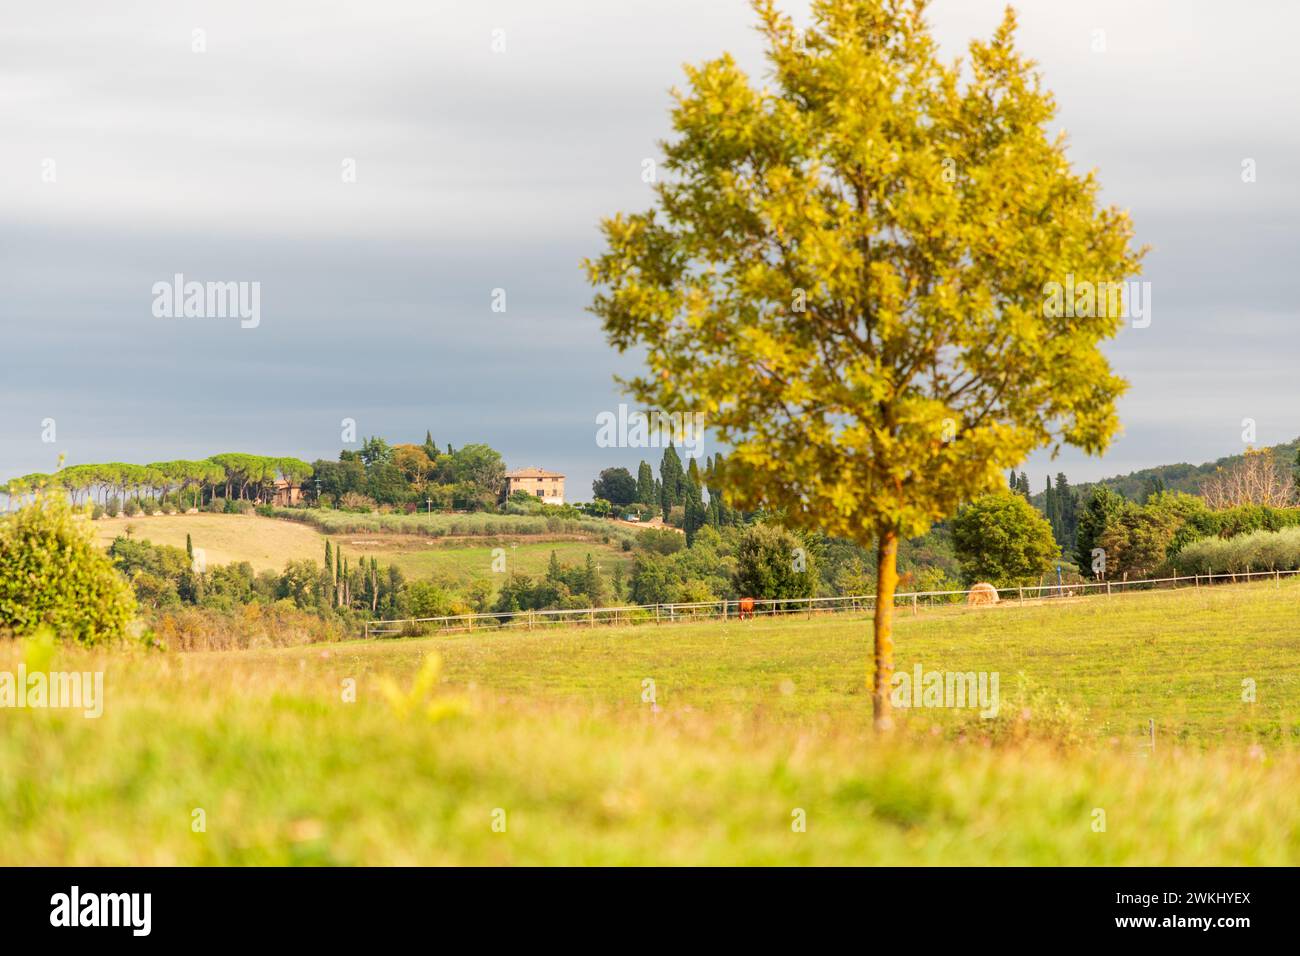 Scenic Tuscany countryside rural landscape in early autumn, Monteriggioni region, Tuscany, Italy. Colourful field and single tree in the foreground, t Stock Photo